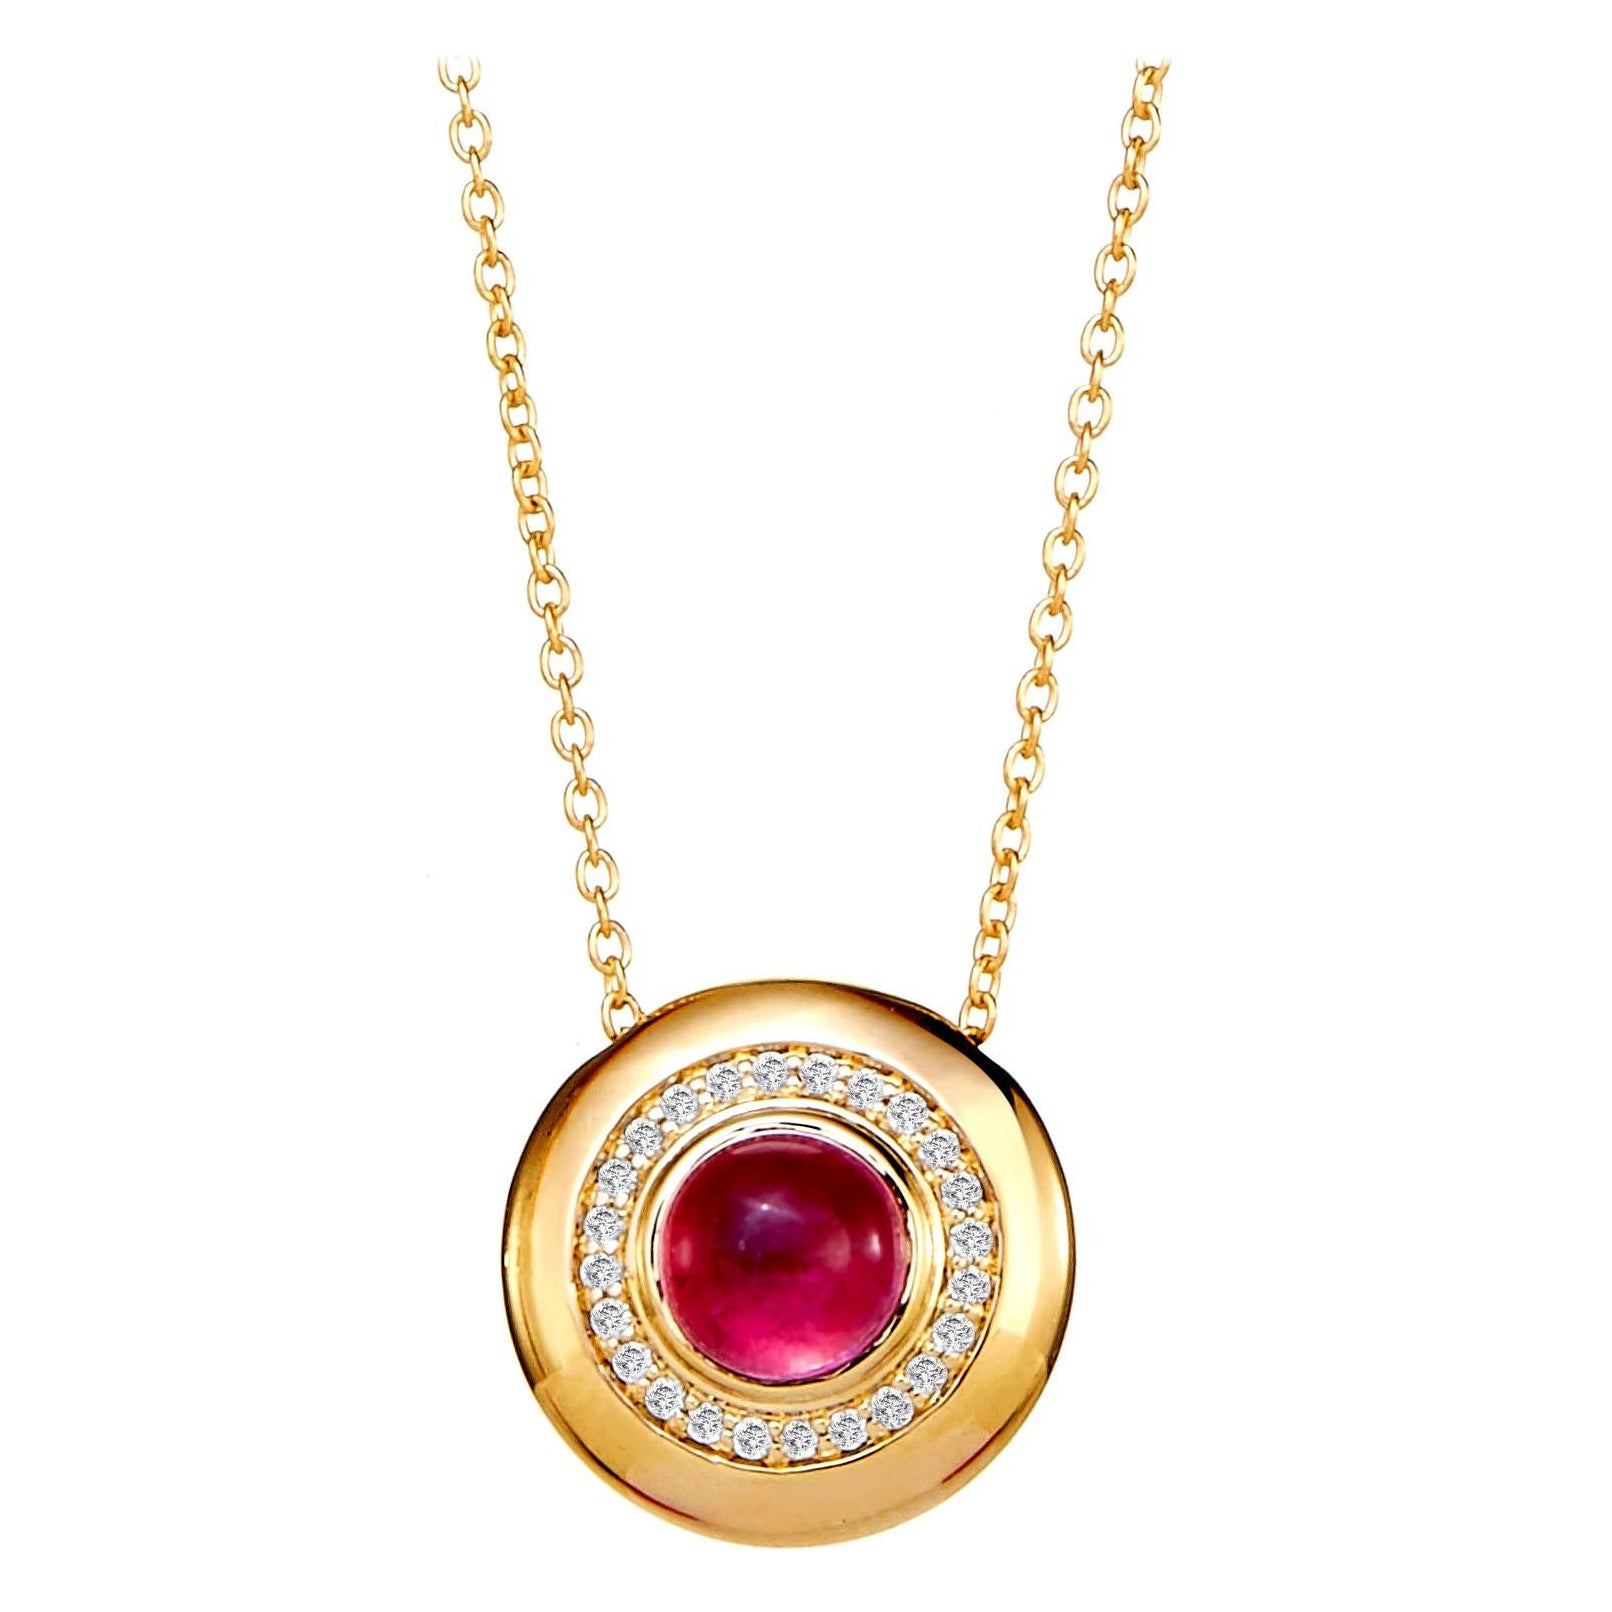 Syna Yellow Gold Cosmic Necklace with Rubellite and Diamonds